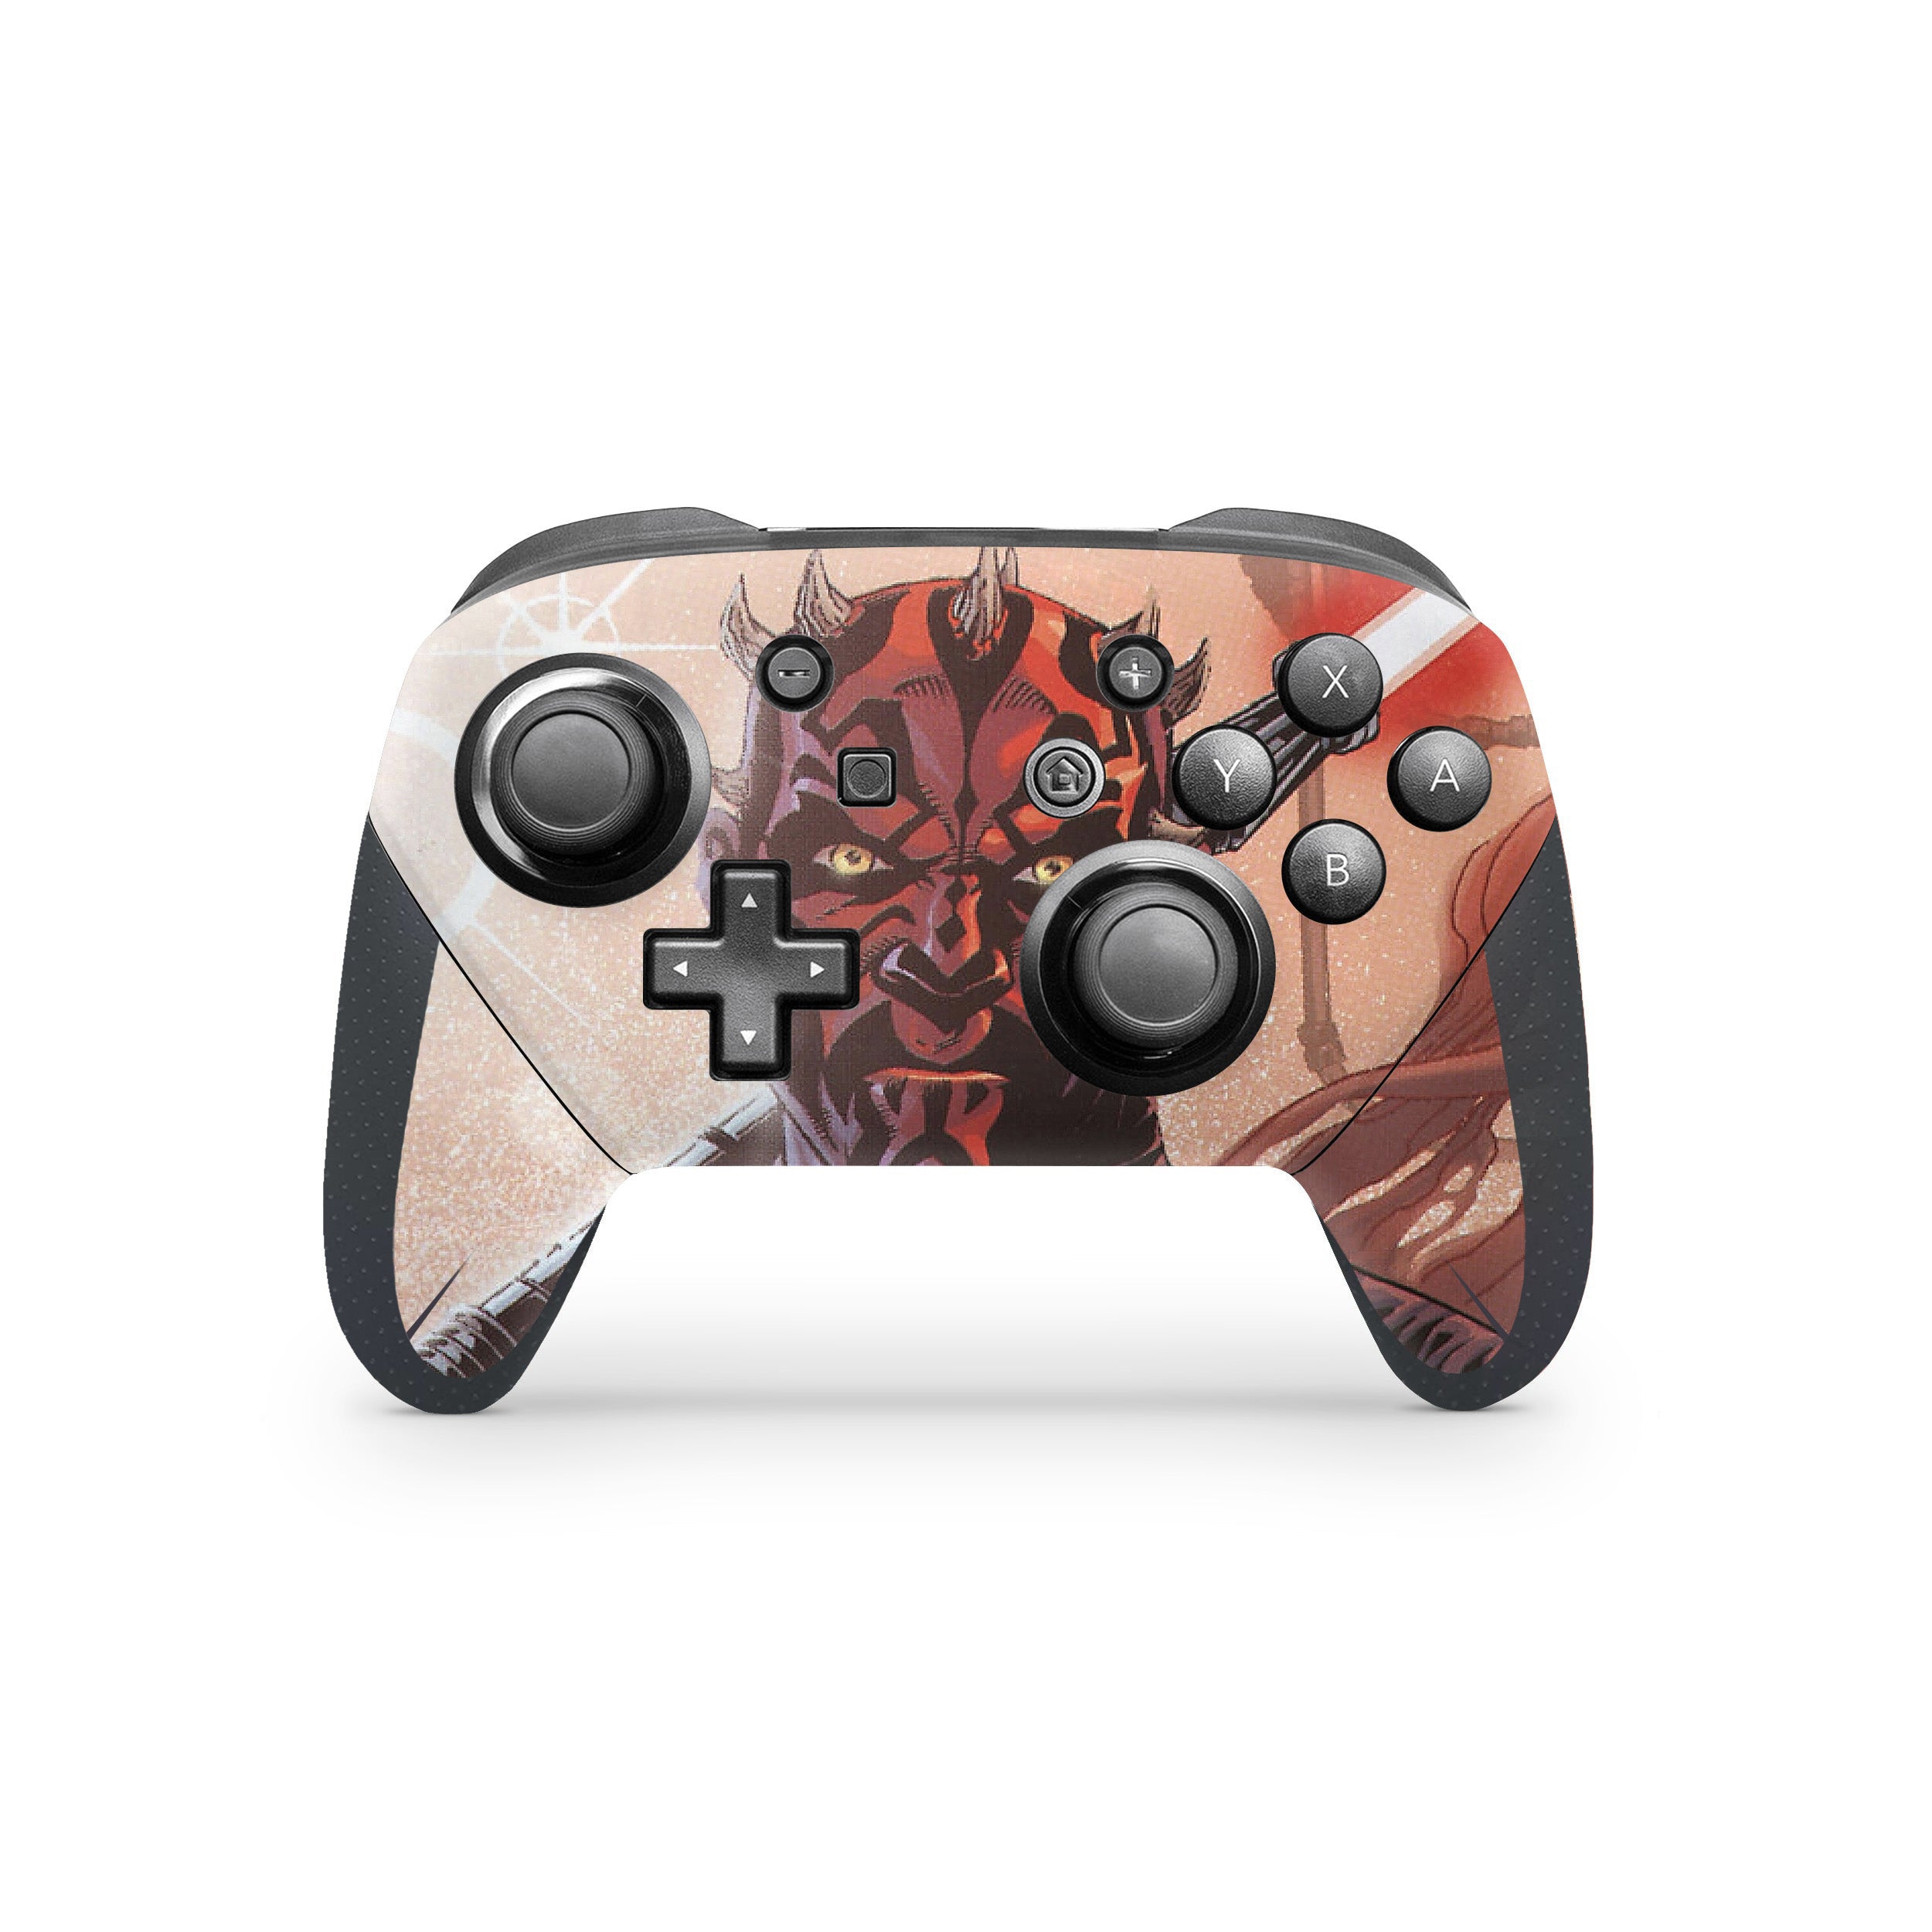 A video game skin featuring a Star Wars Darth Maul design for the Switch Pro Controller.